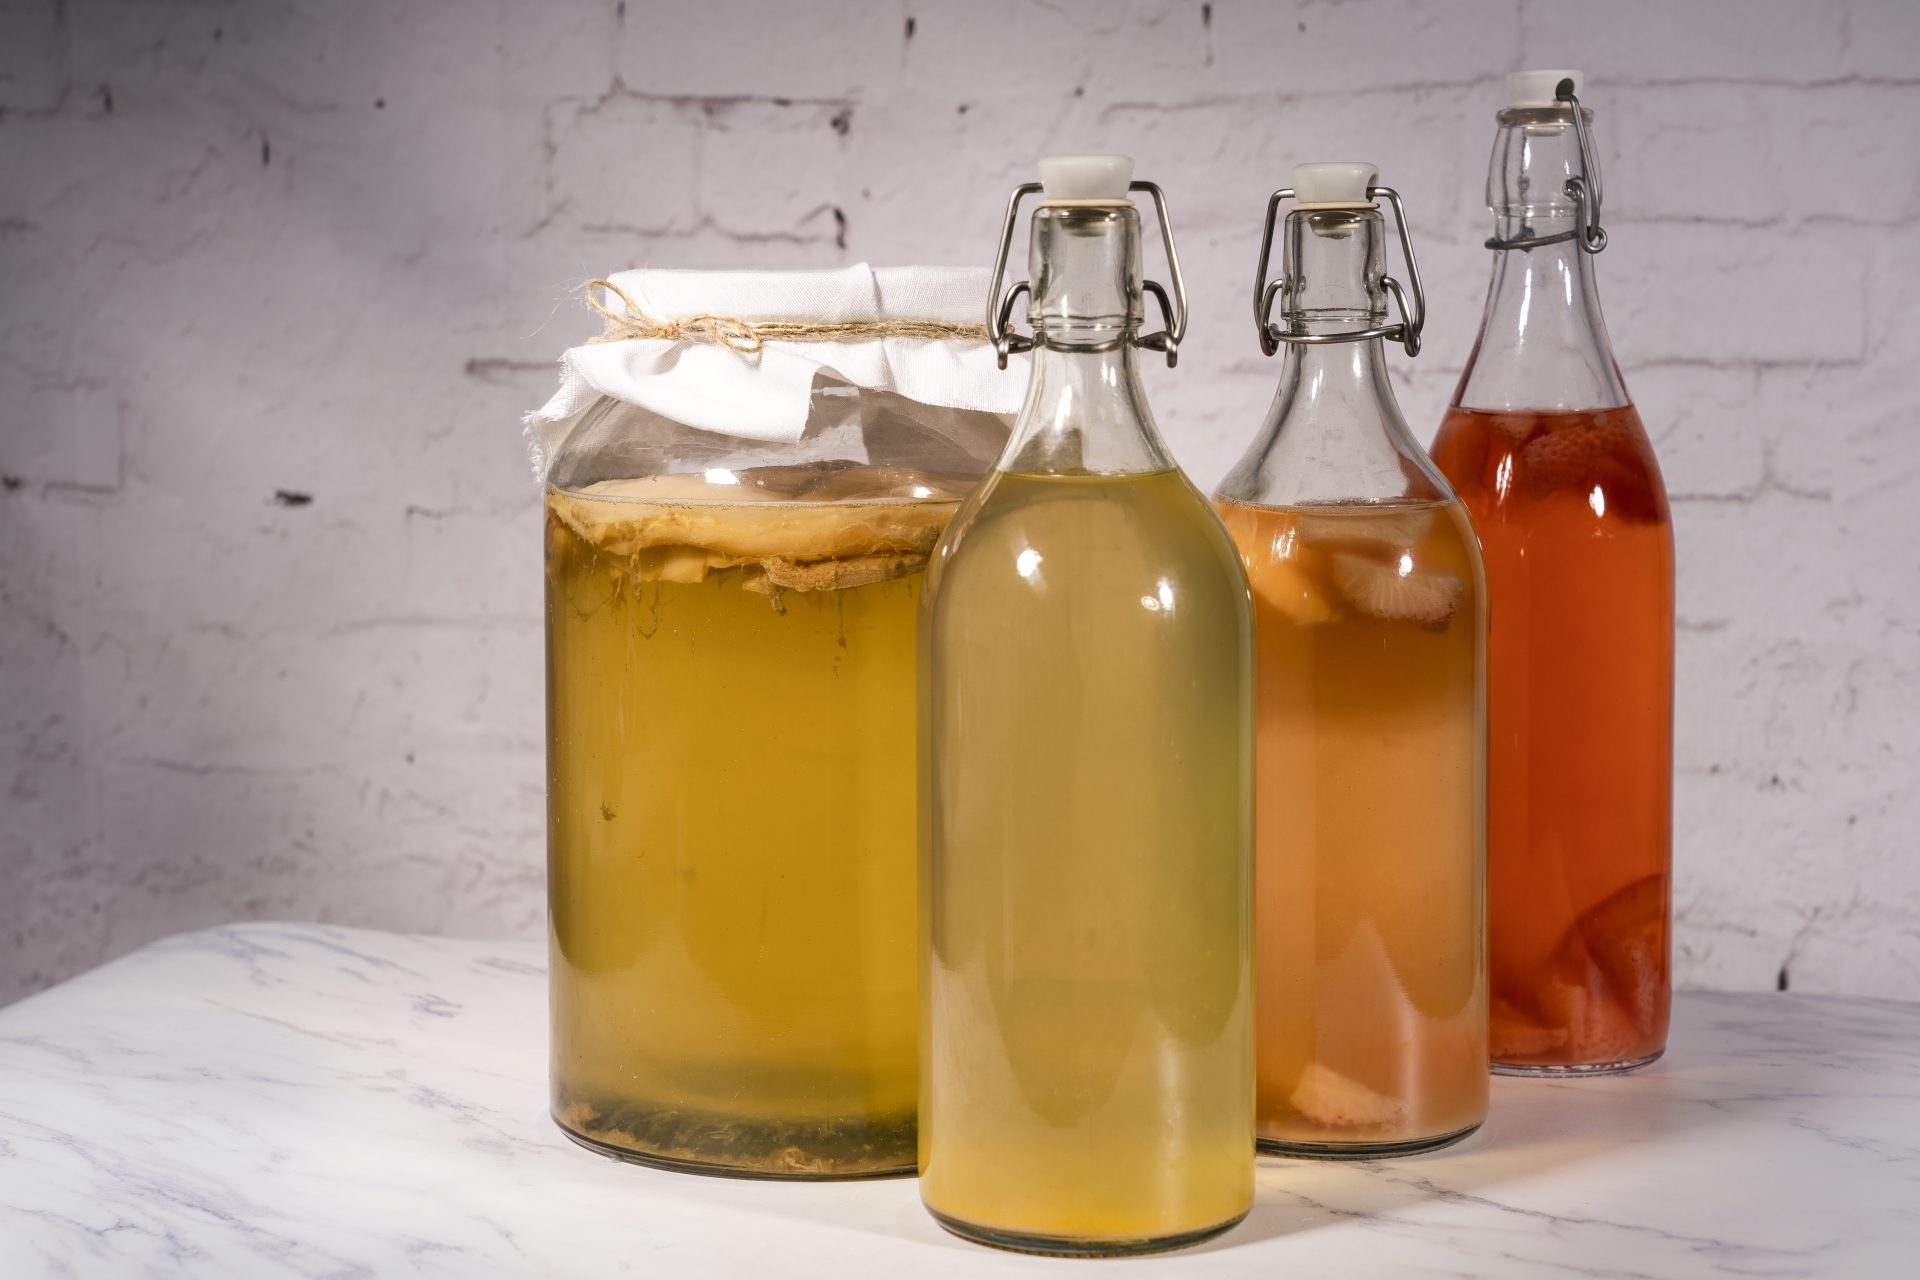 <p>Besides evidence to support the power of fermented foods in general, kombucha, a fermented tea, hasn't been deeply studied. According to the Mayo Clinic, some research suggests kombucha tea may support a healthy immune system and prevent constipation, but more evidence is needed.</p>